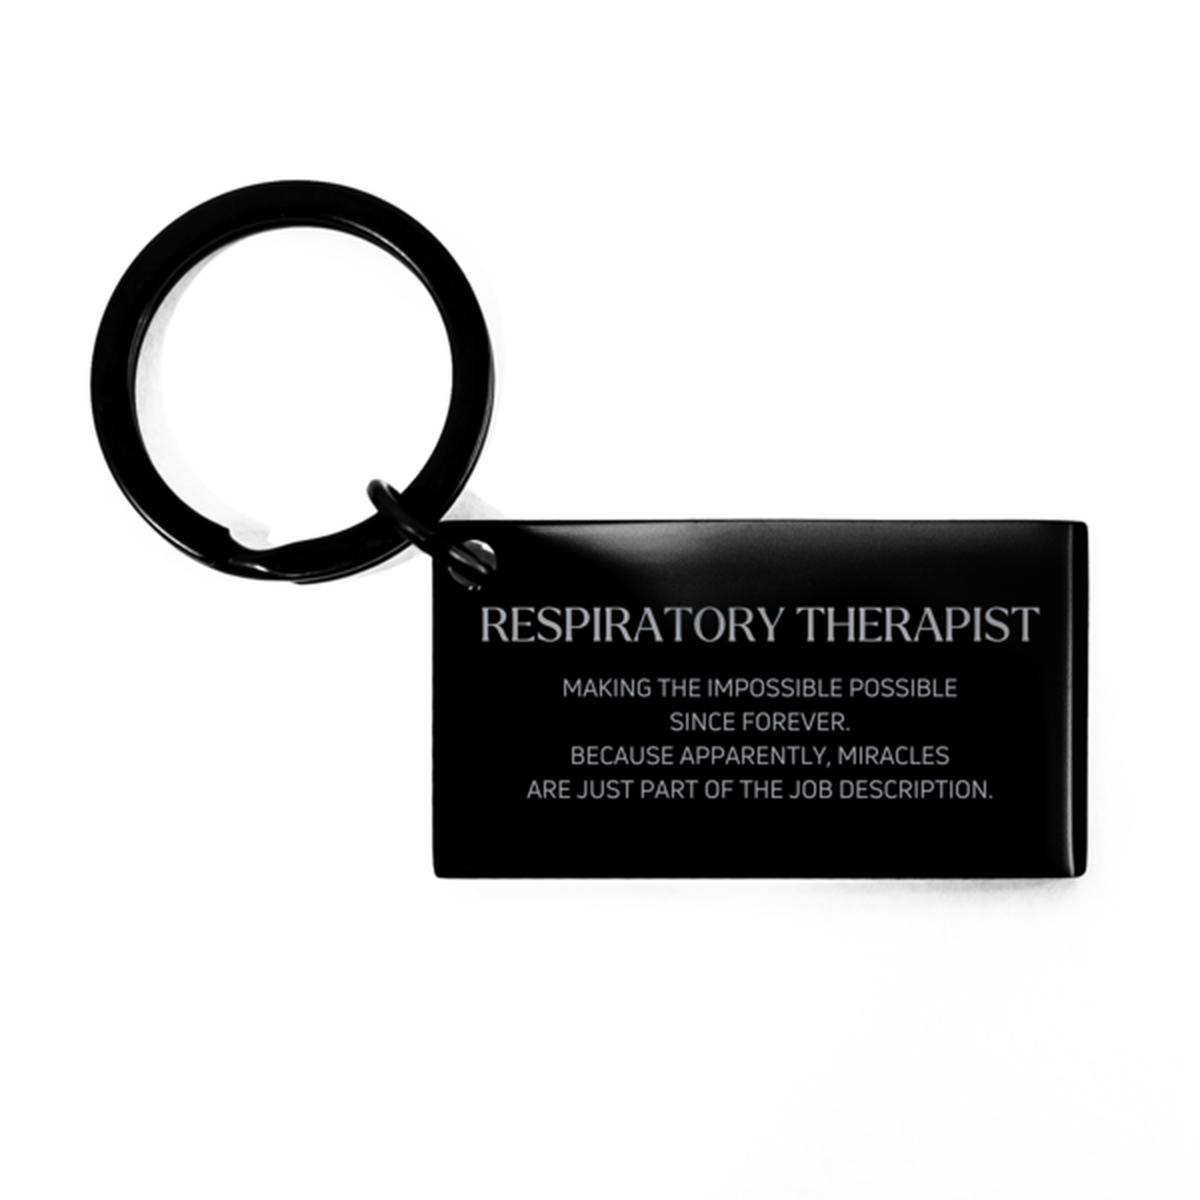 Funny Respiratory Therapist Gifts, Miracles are just part of the job description, Inspirational Birthday Keychain For Respiratory Therapist, Men, Women, Coworkers, Friends, Boss